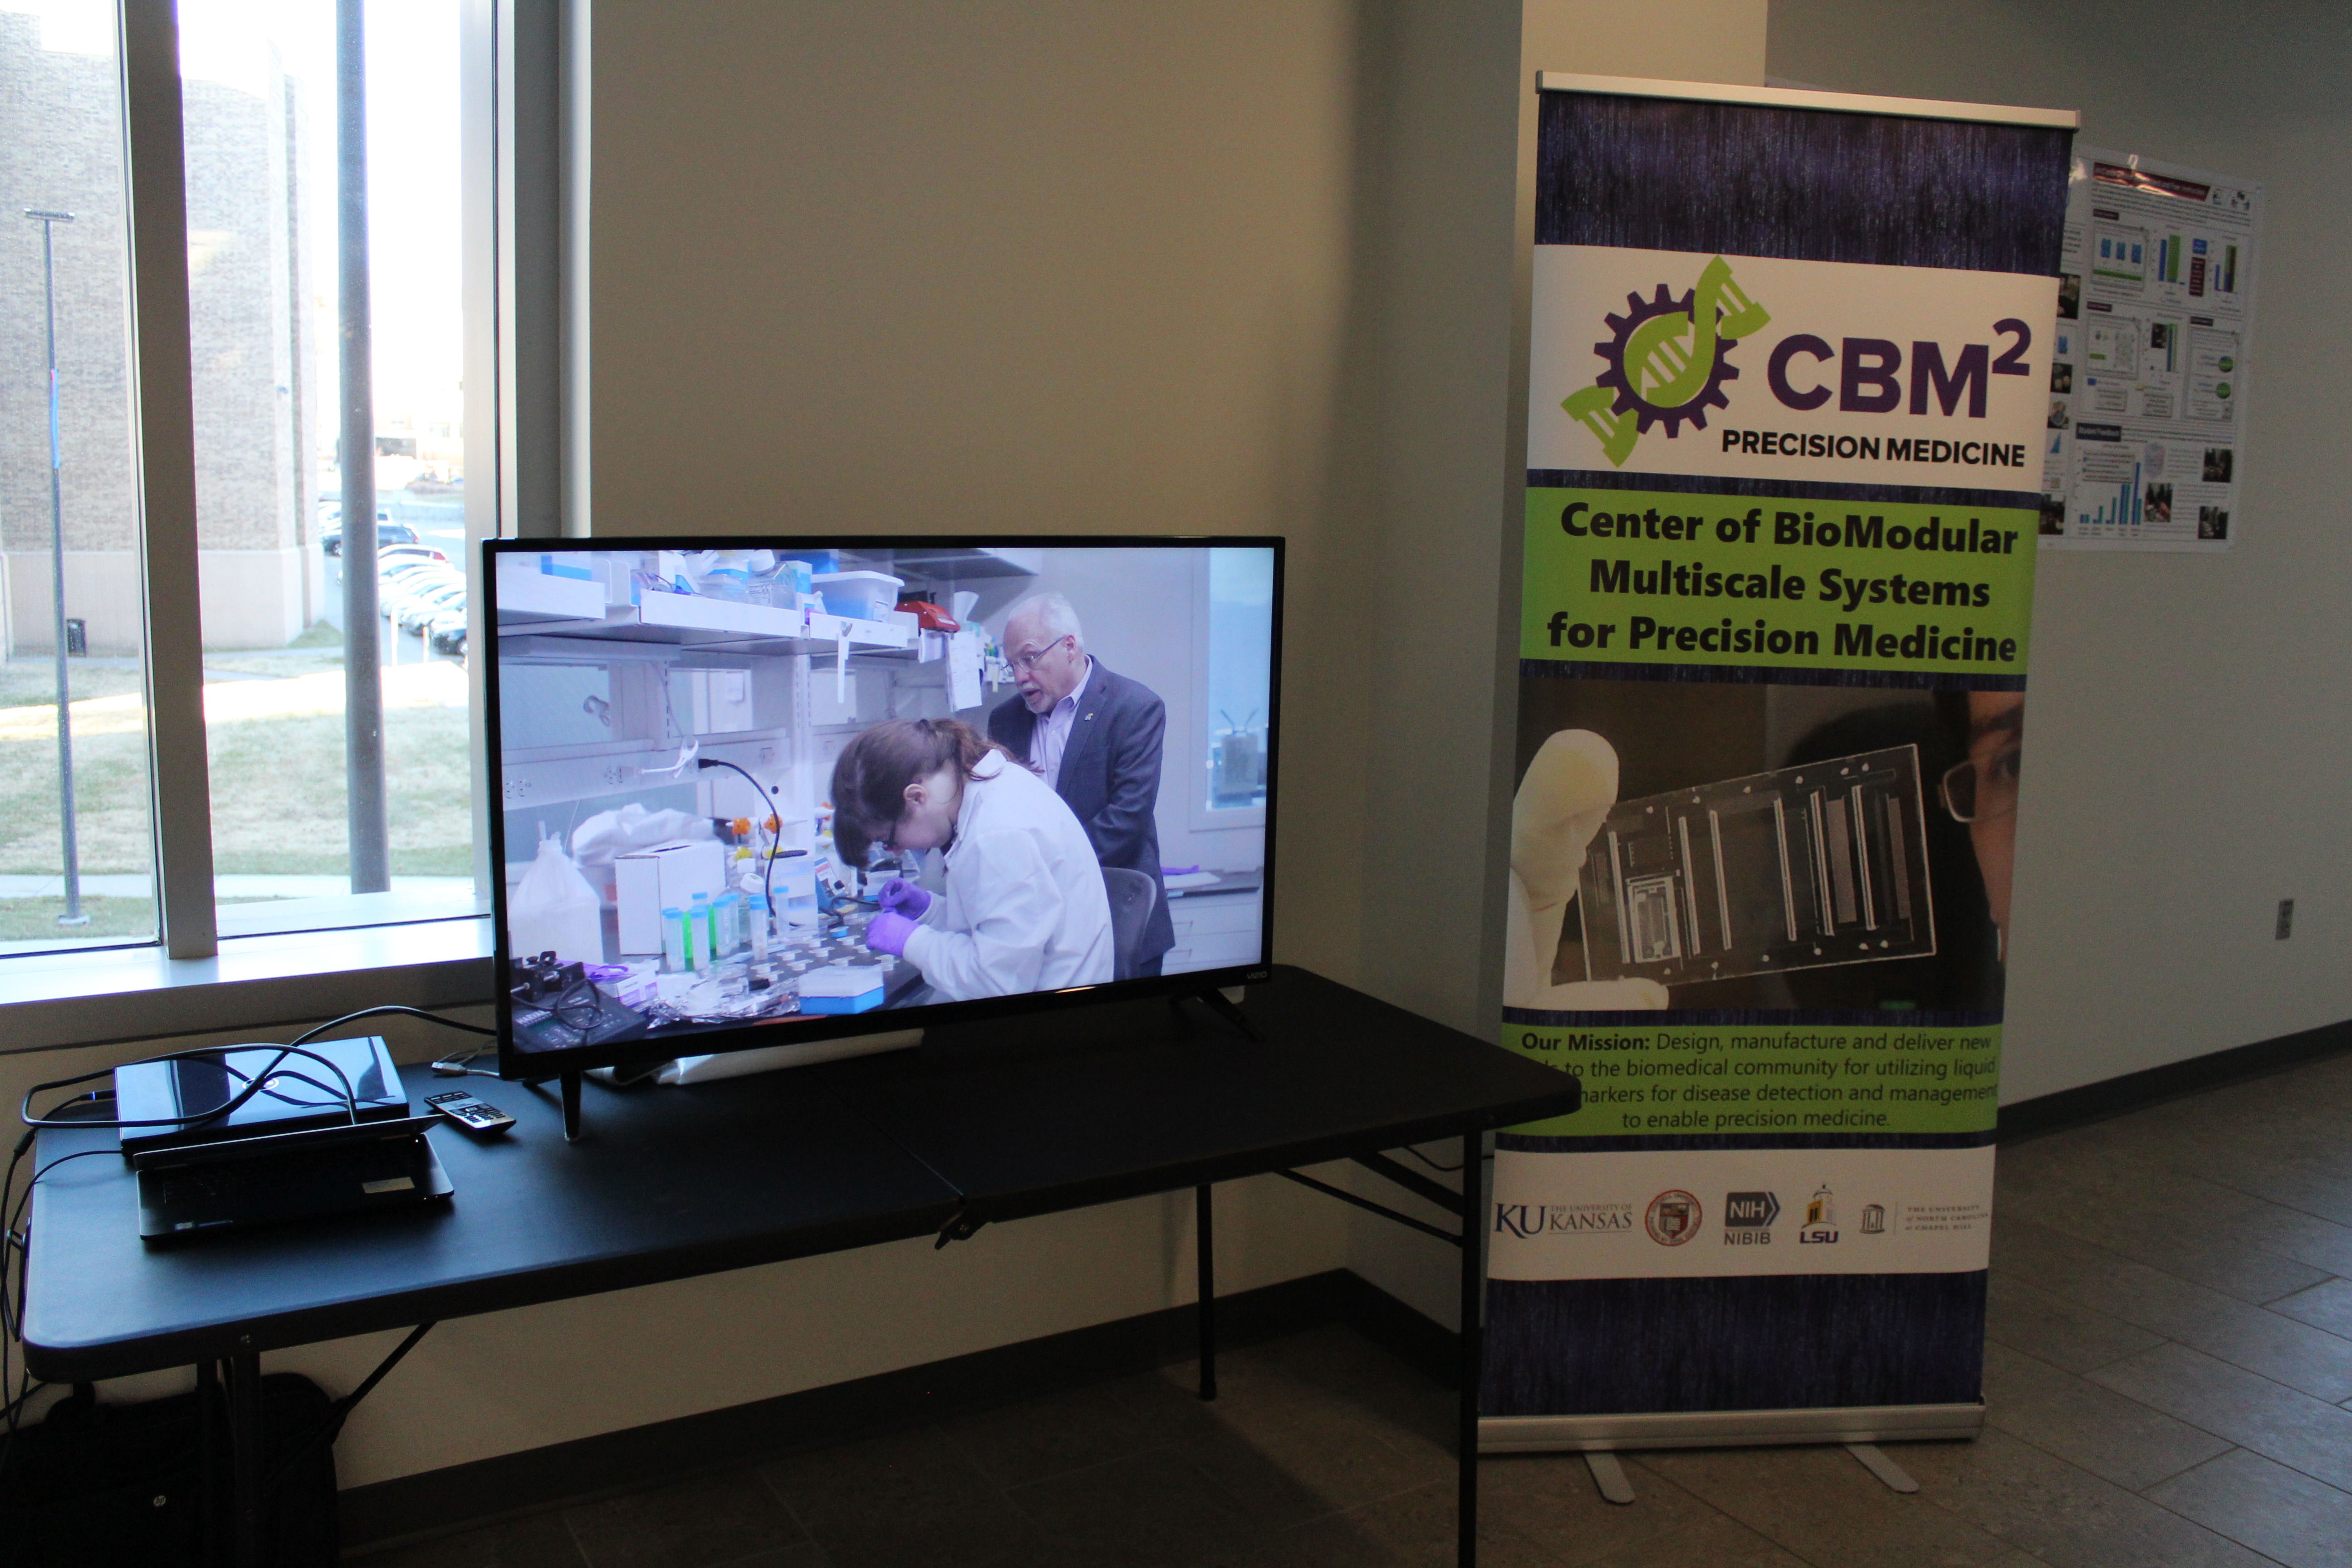 A television screen displaying a CBMM advertisement with a CBMM Chemistry Festival poster placed on a stand next to the table where the TV is located.